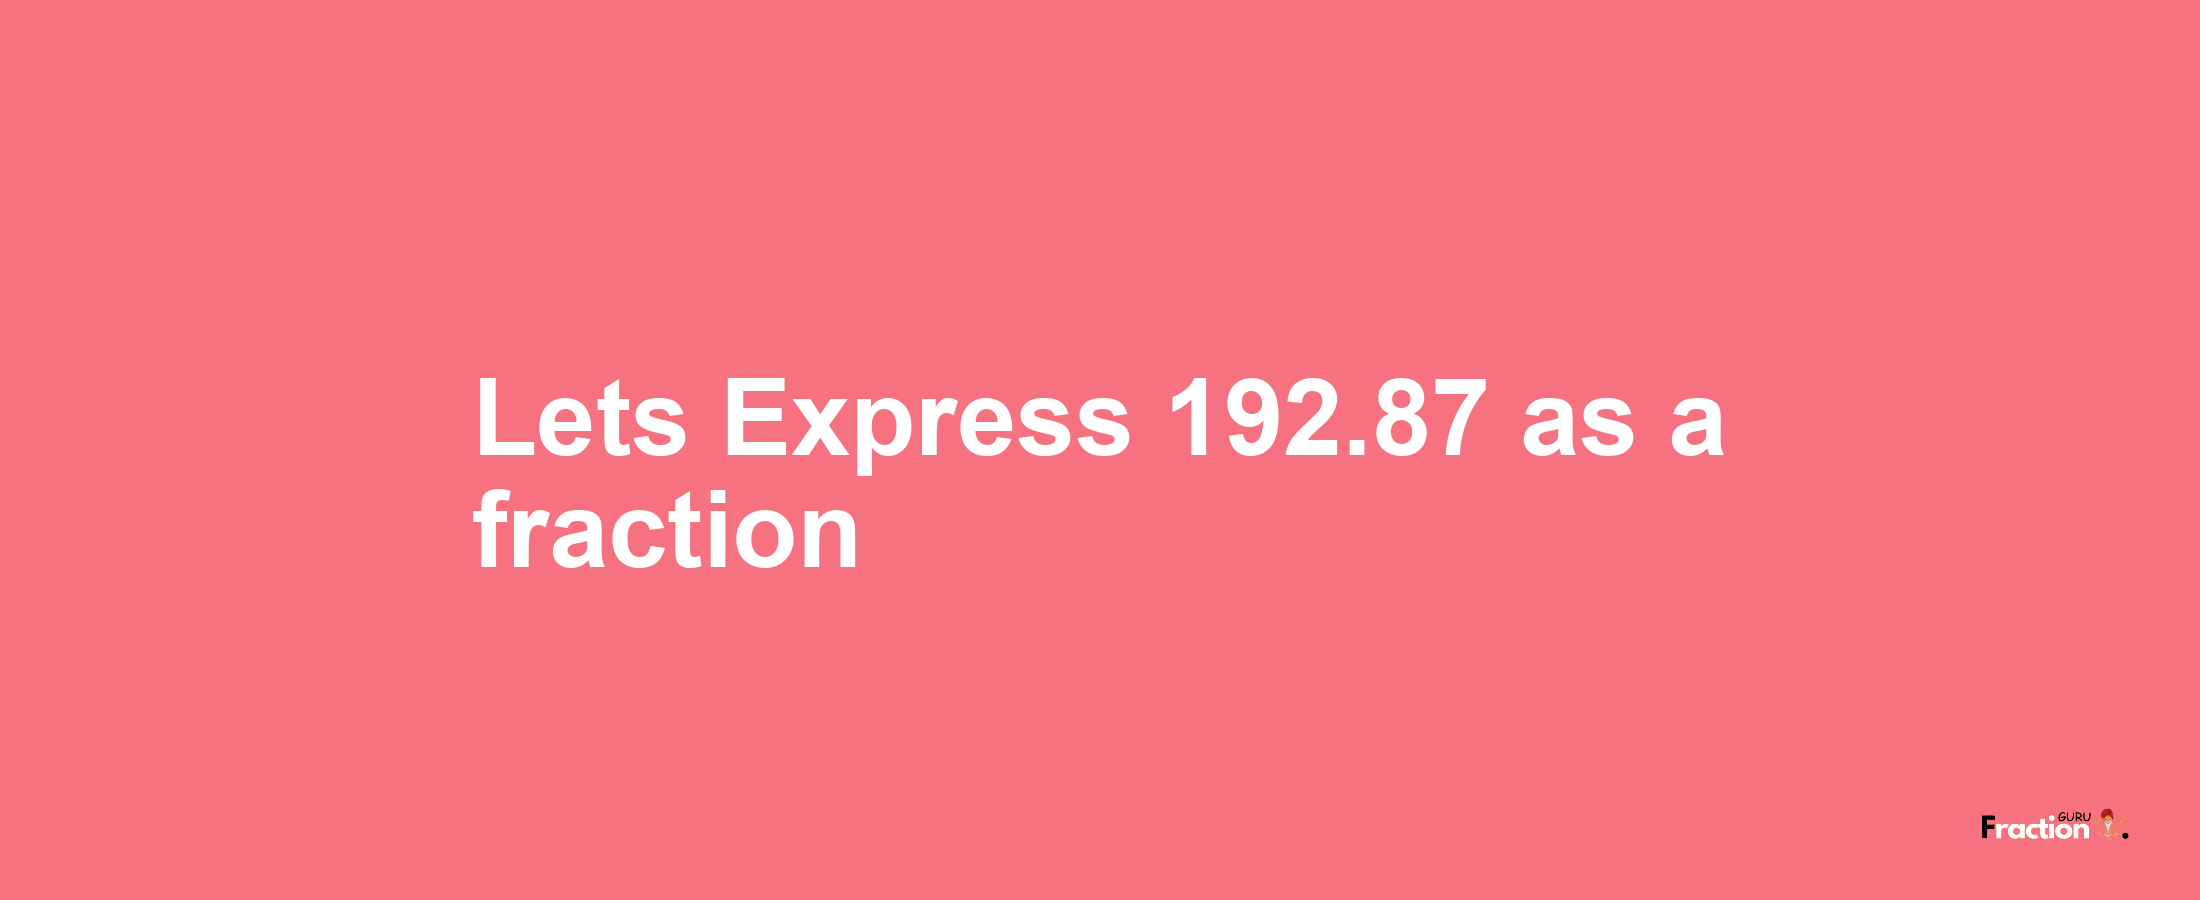 Lets Express 192.87 as afraction